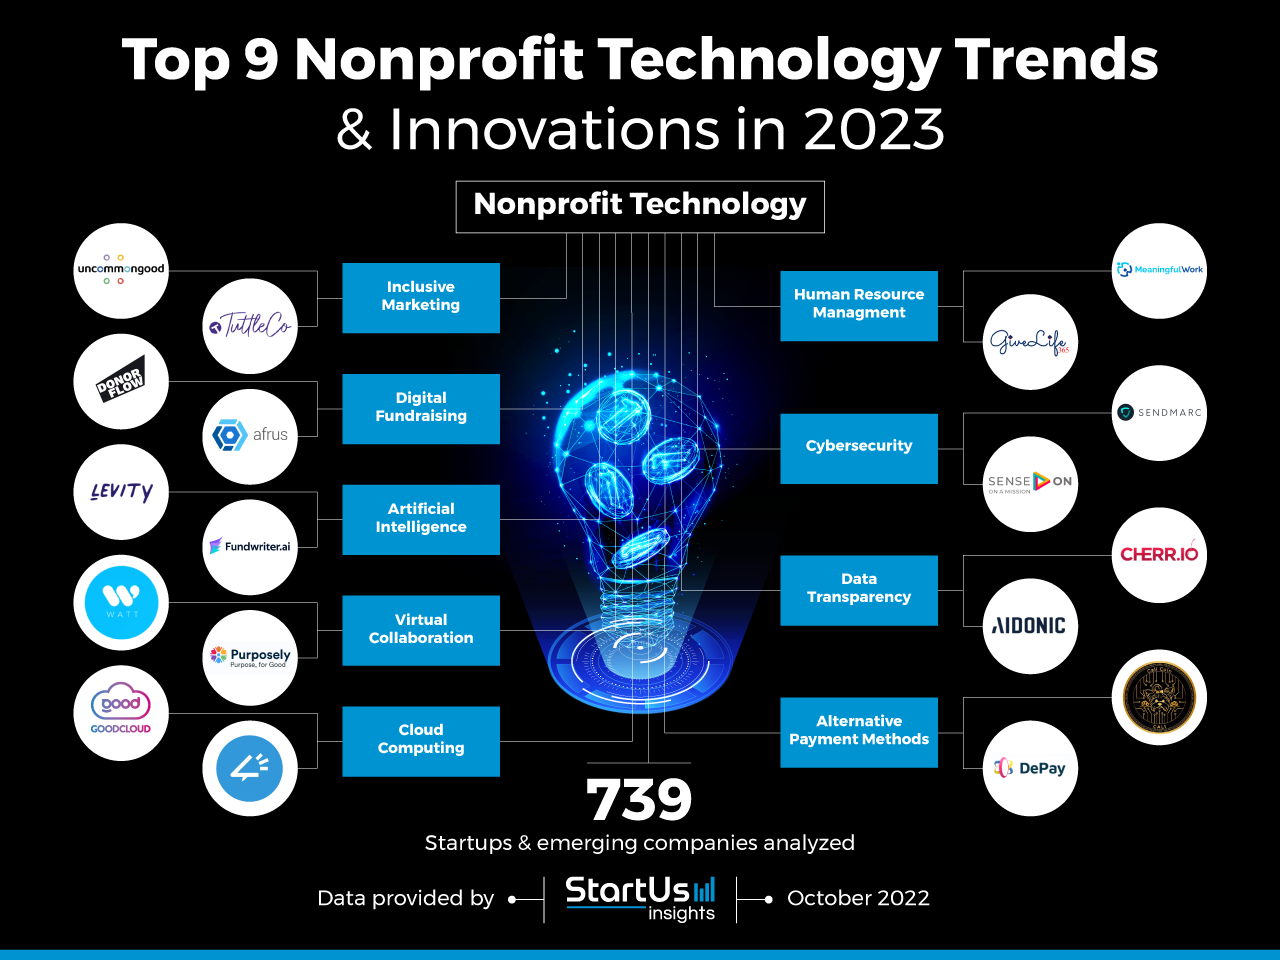 Top 9 Nonprofit Technology Trends & Innovations in 2023